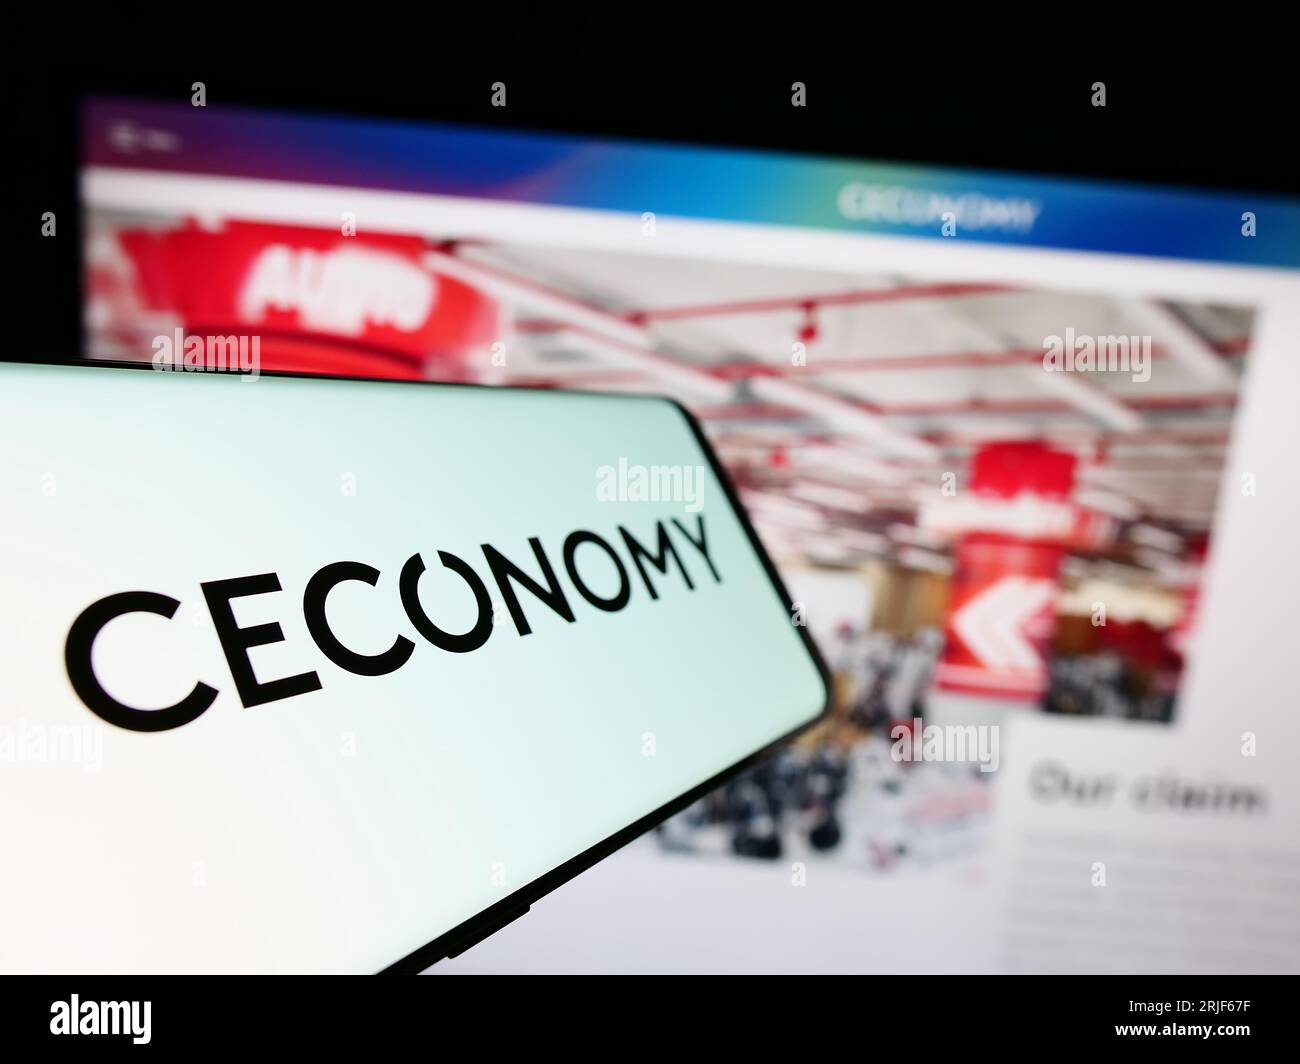 Smartphone with logo of German retail company Ceconomy AG on screen in front of business website. Focus on center-left of phone display. Stock Photo